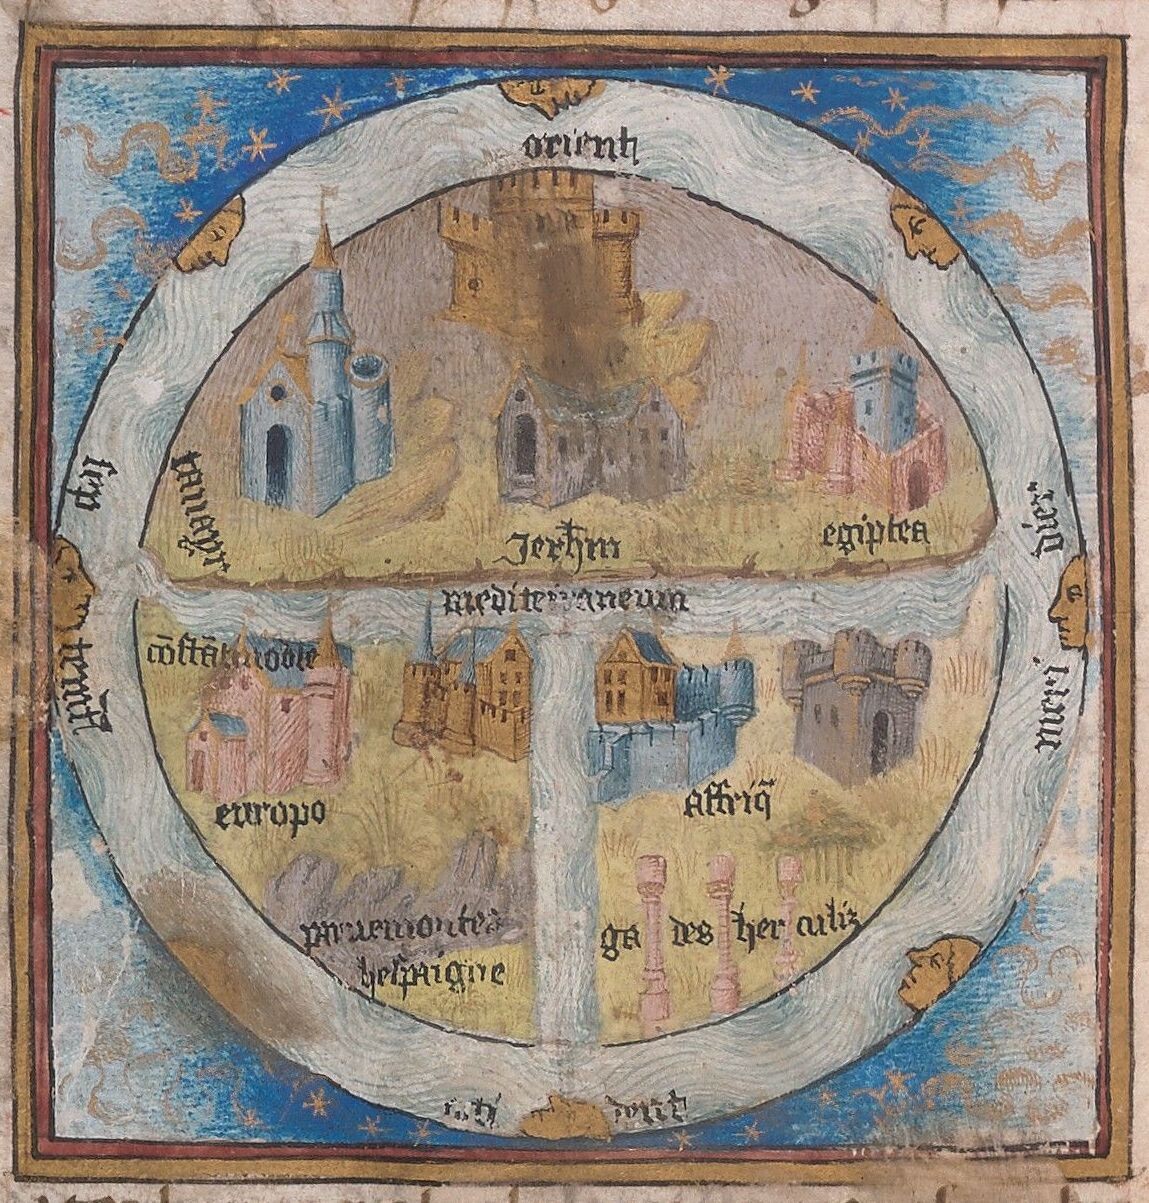 Hand painted illuminated diagram of the earth divided into three parts: Asia, Africa, and Europe. Continents have miniature cities on them. 